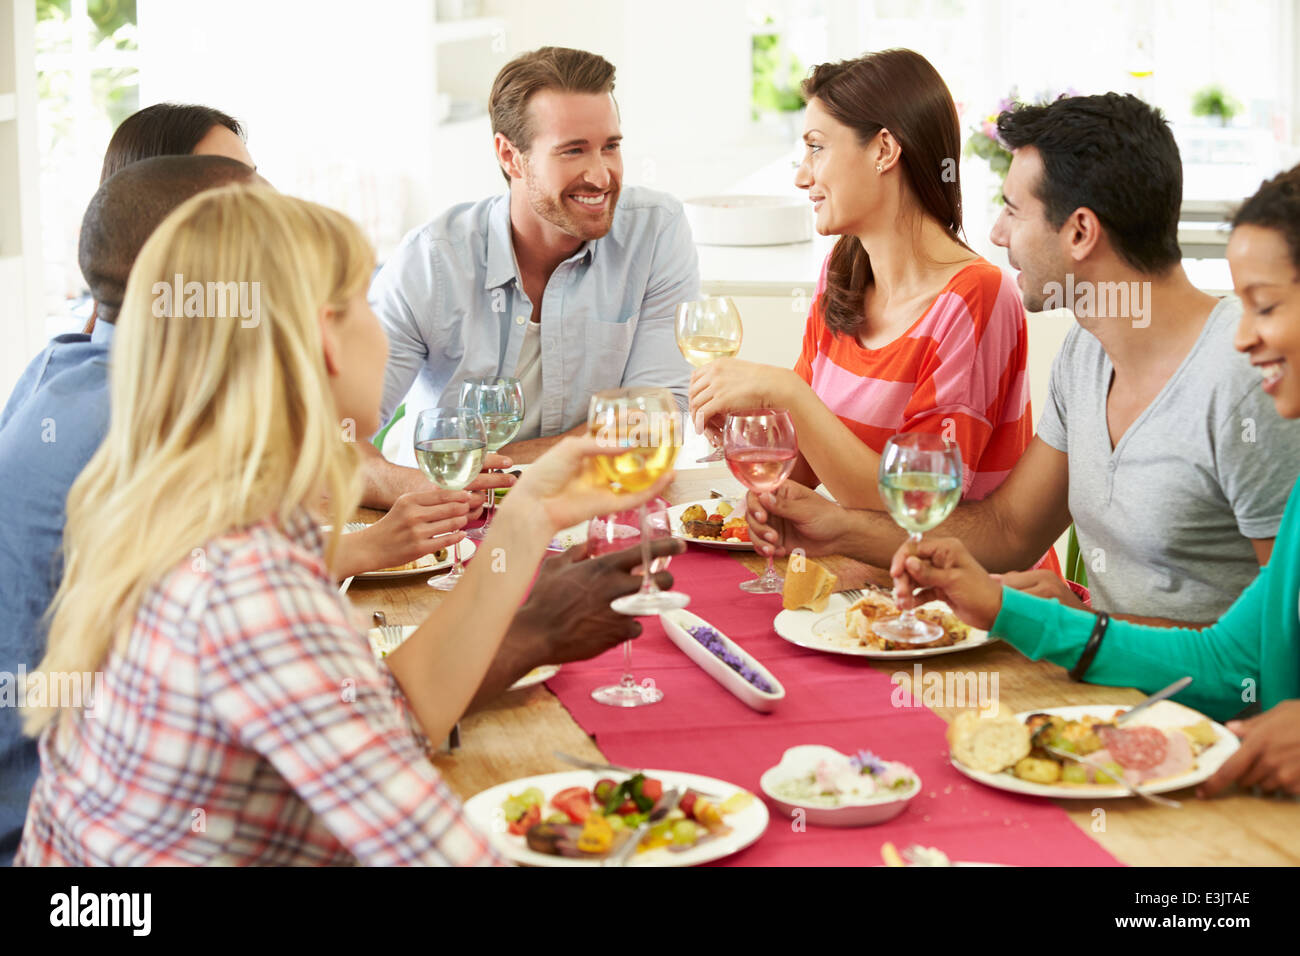 Group Of Friends Making Toast Around Table At Dinner Party Stock Photo